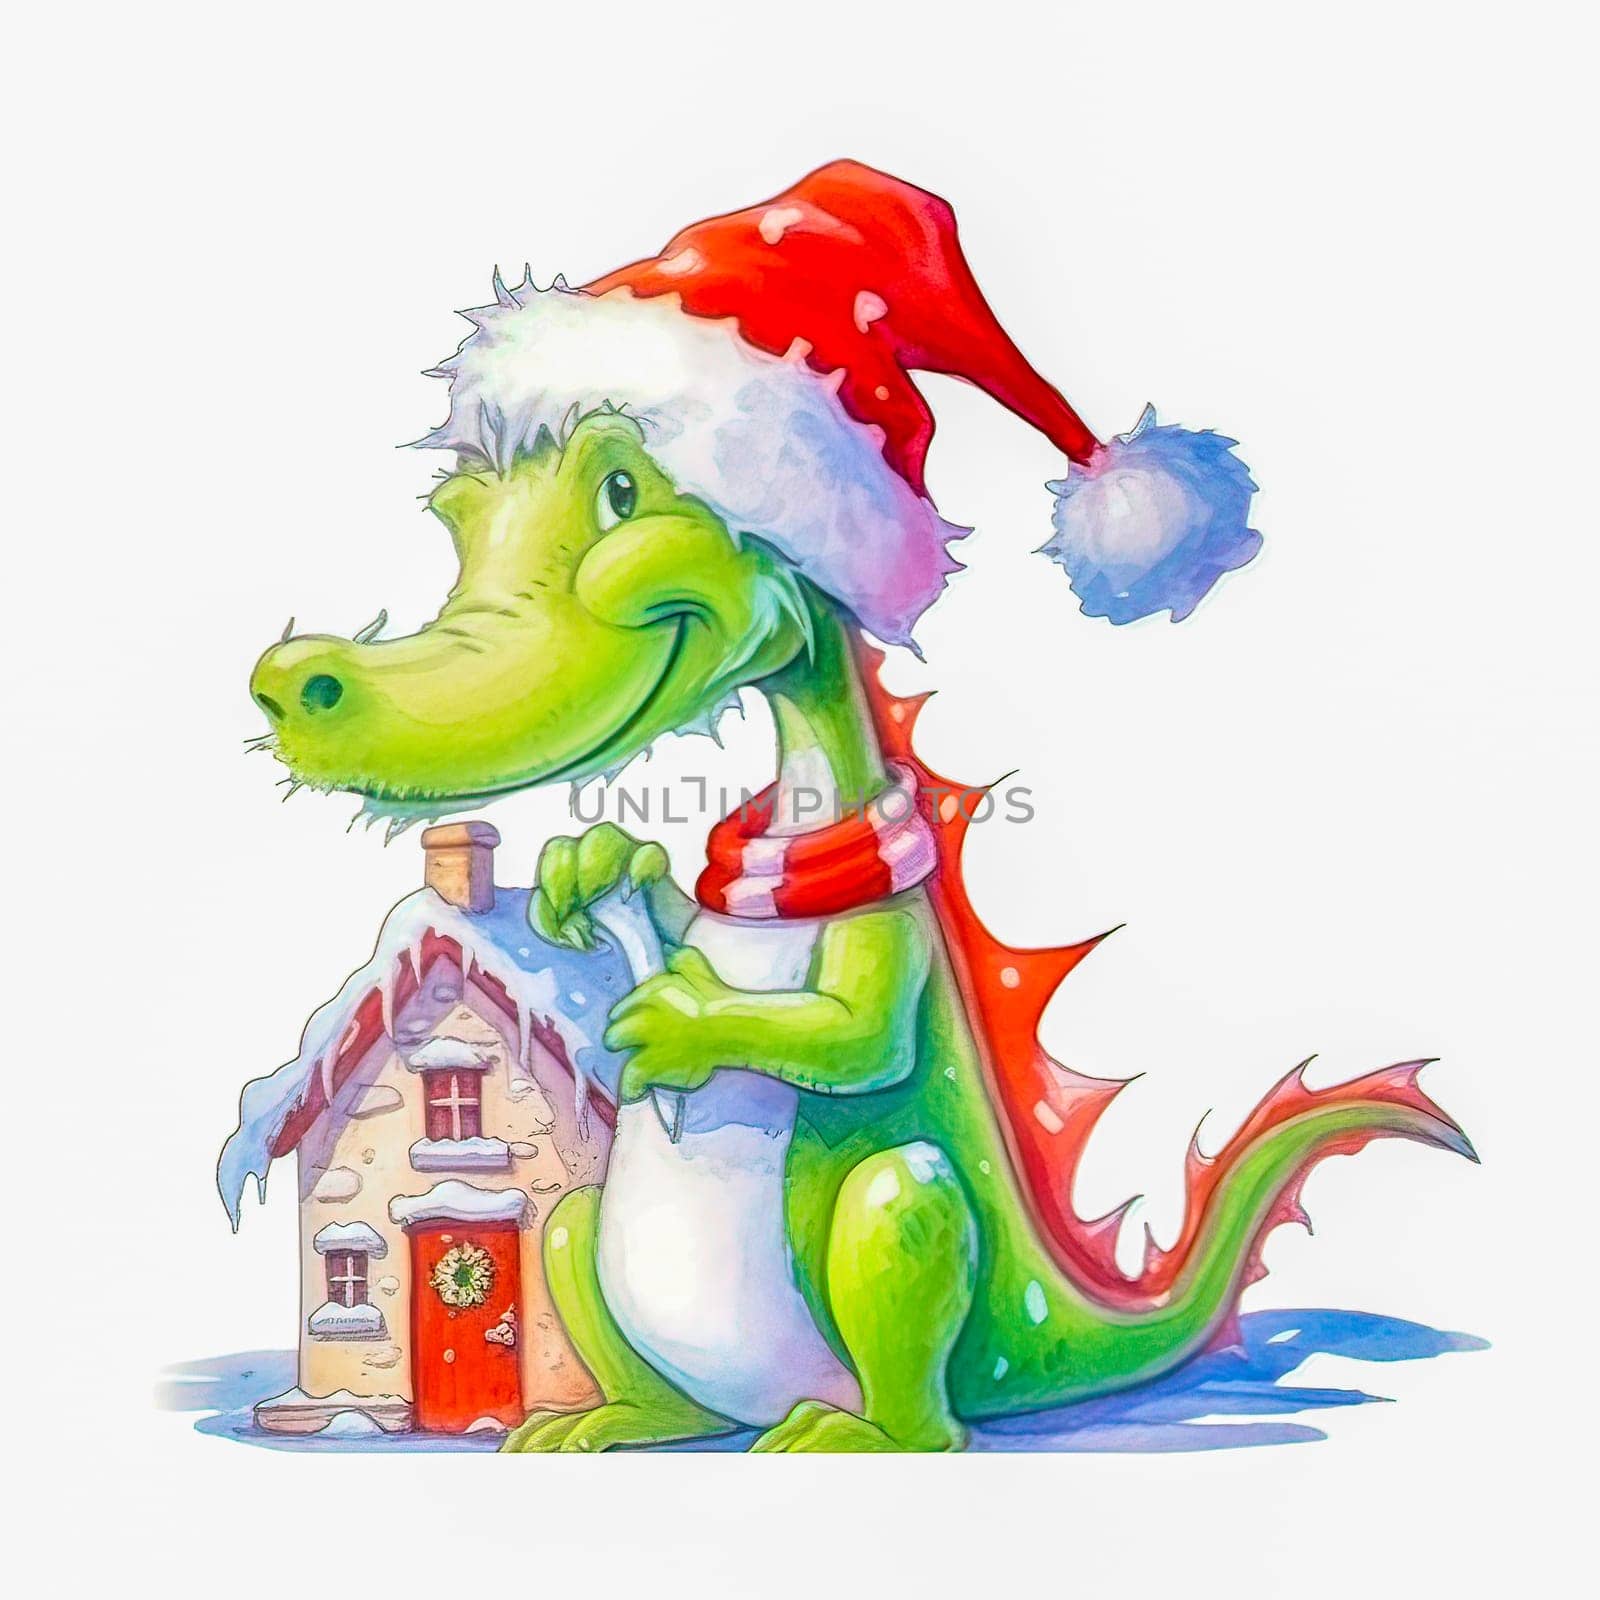 Illustration of a small green dragon in a red cap with a Christmas house on a white background. Year of the dragon. New Year illustration. High quality illustration